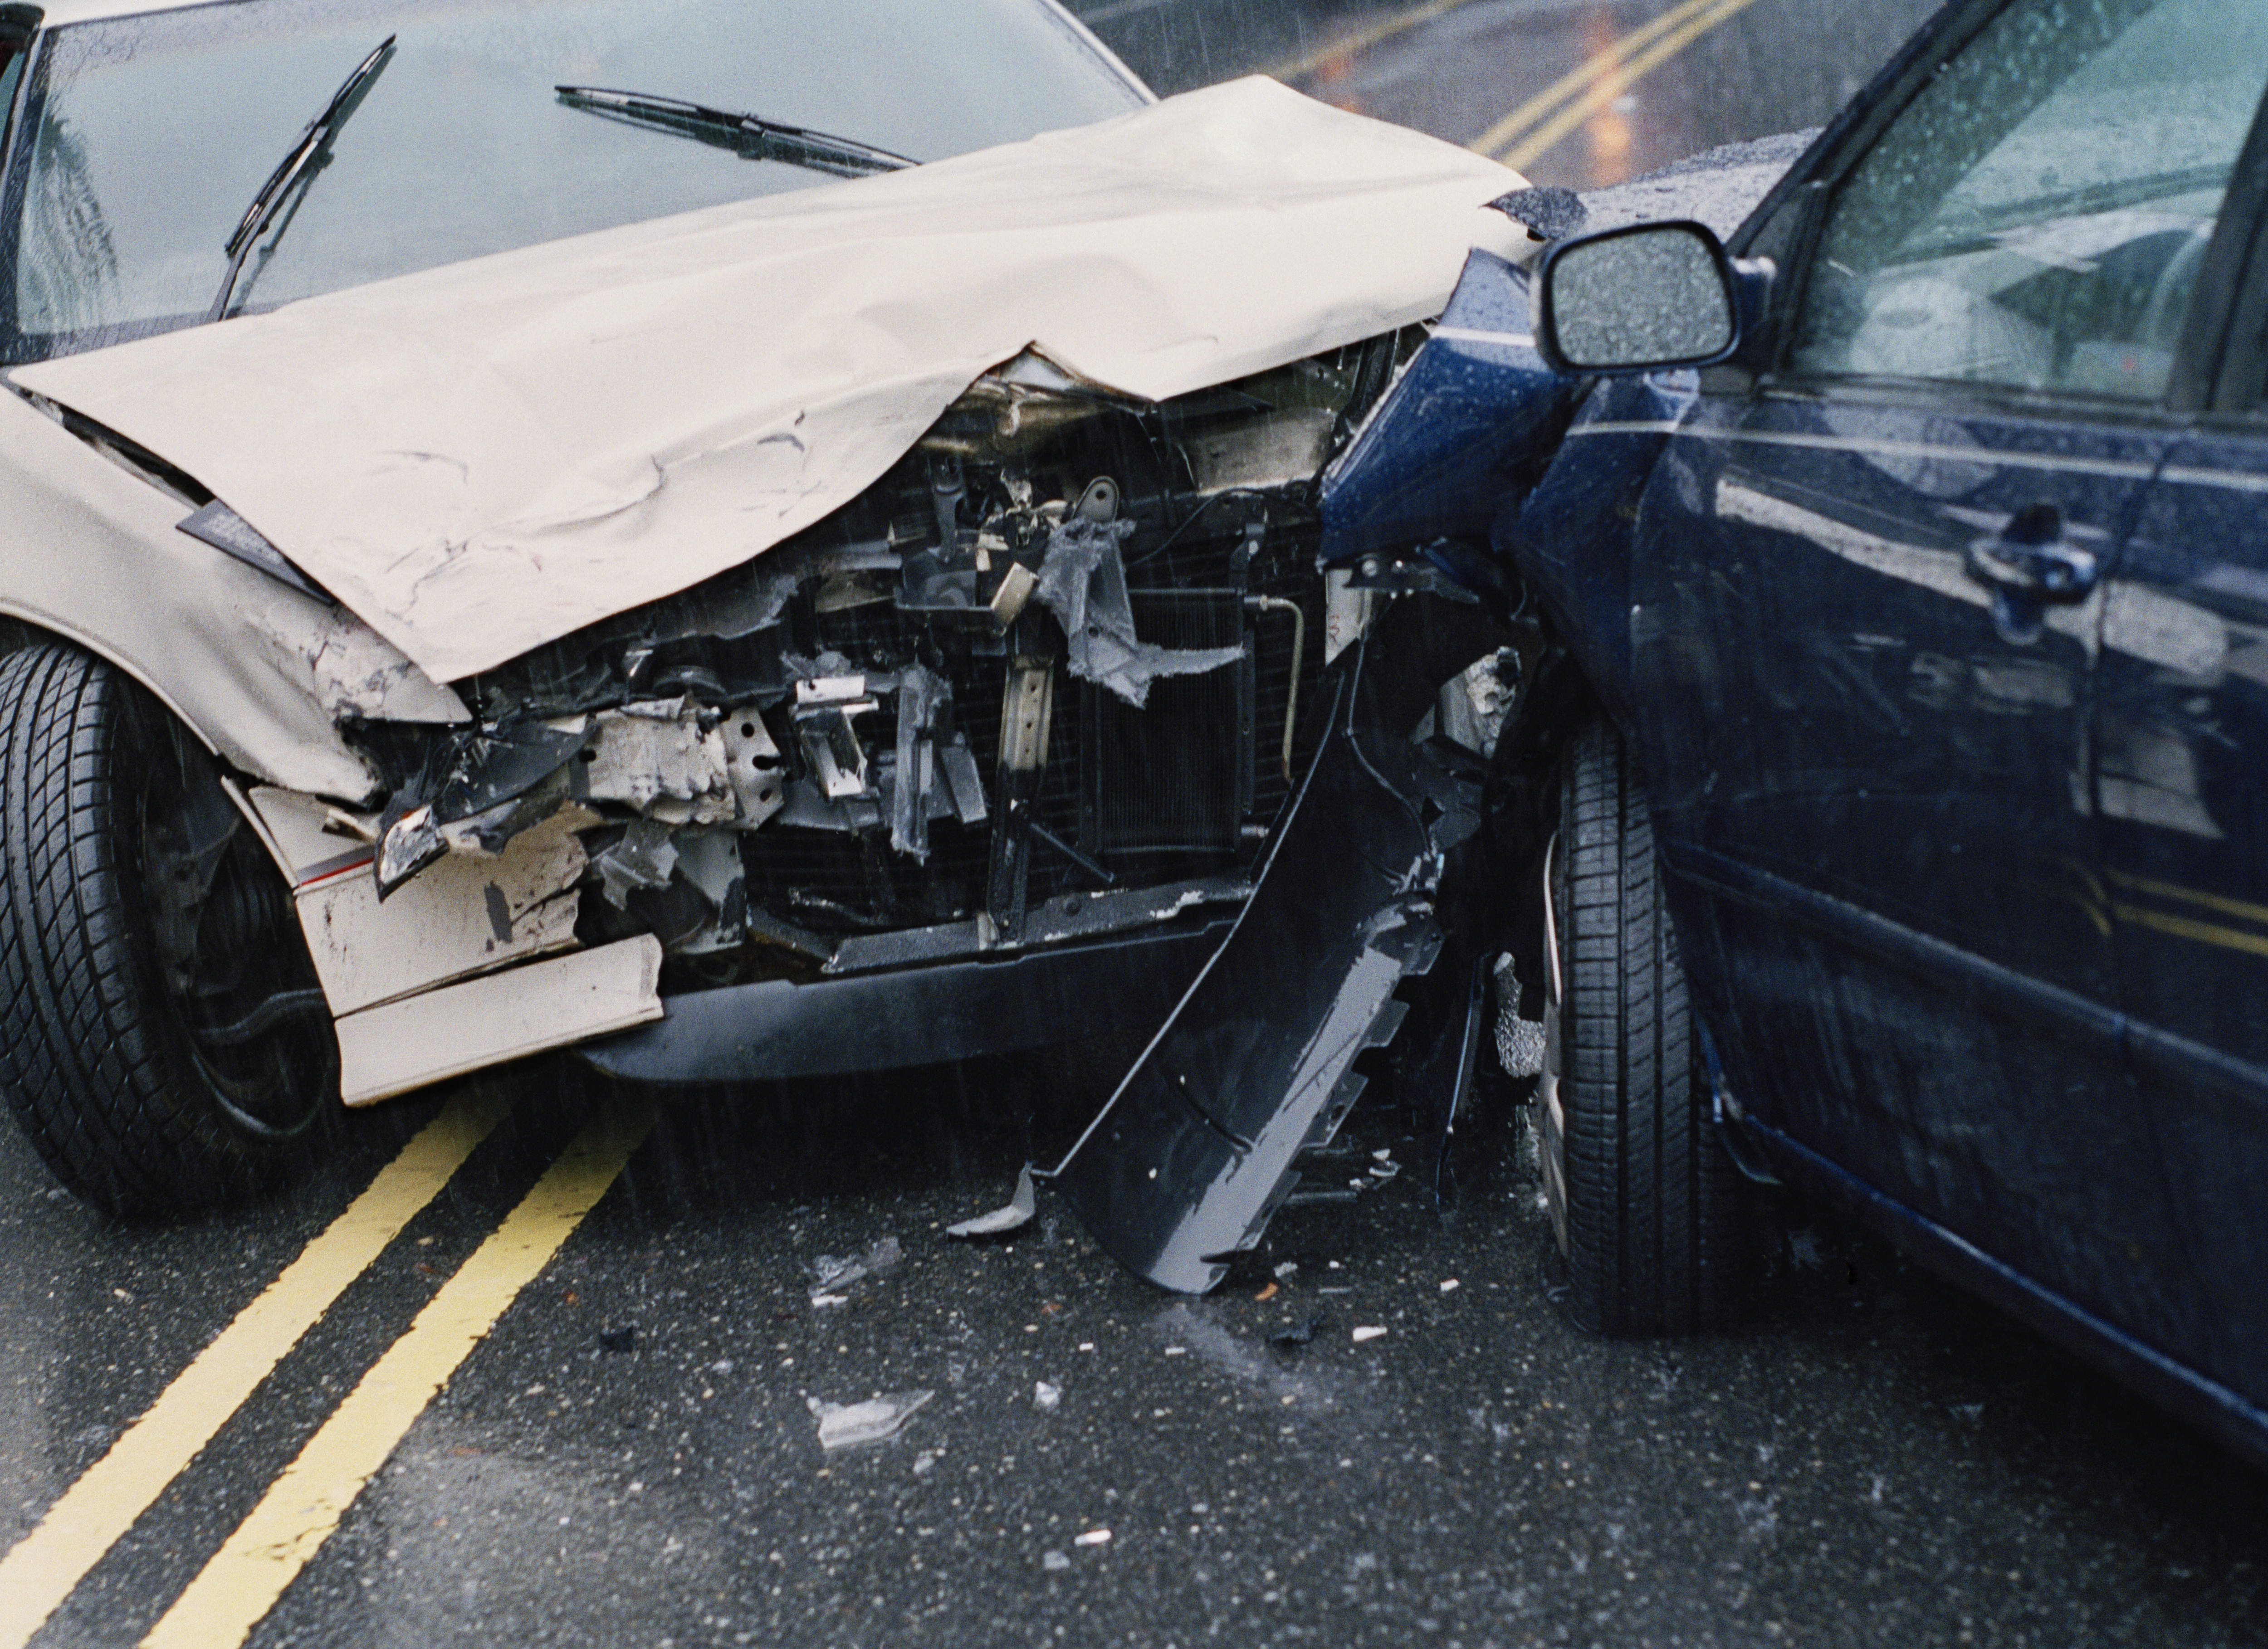 A car accident | Source: Getty Images